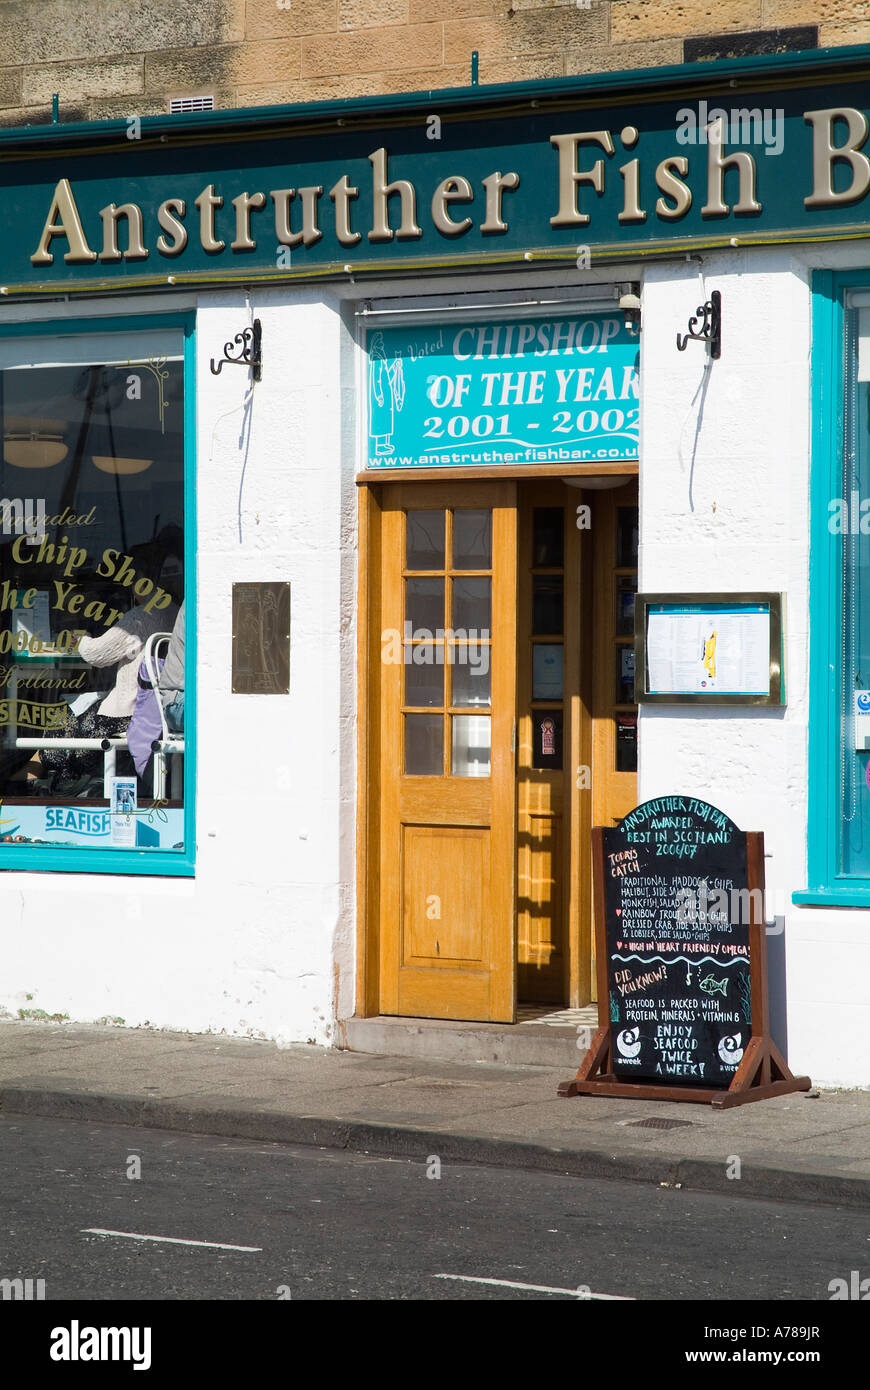 dh Scottish Fish Bar ANSTRUTHER EAST NEUK FIFE SCOTLAND Famous Fish Chip shop entrance front door menu board seafood restaurant UK takeaway chips Stock Photo